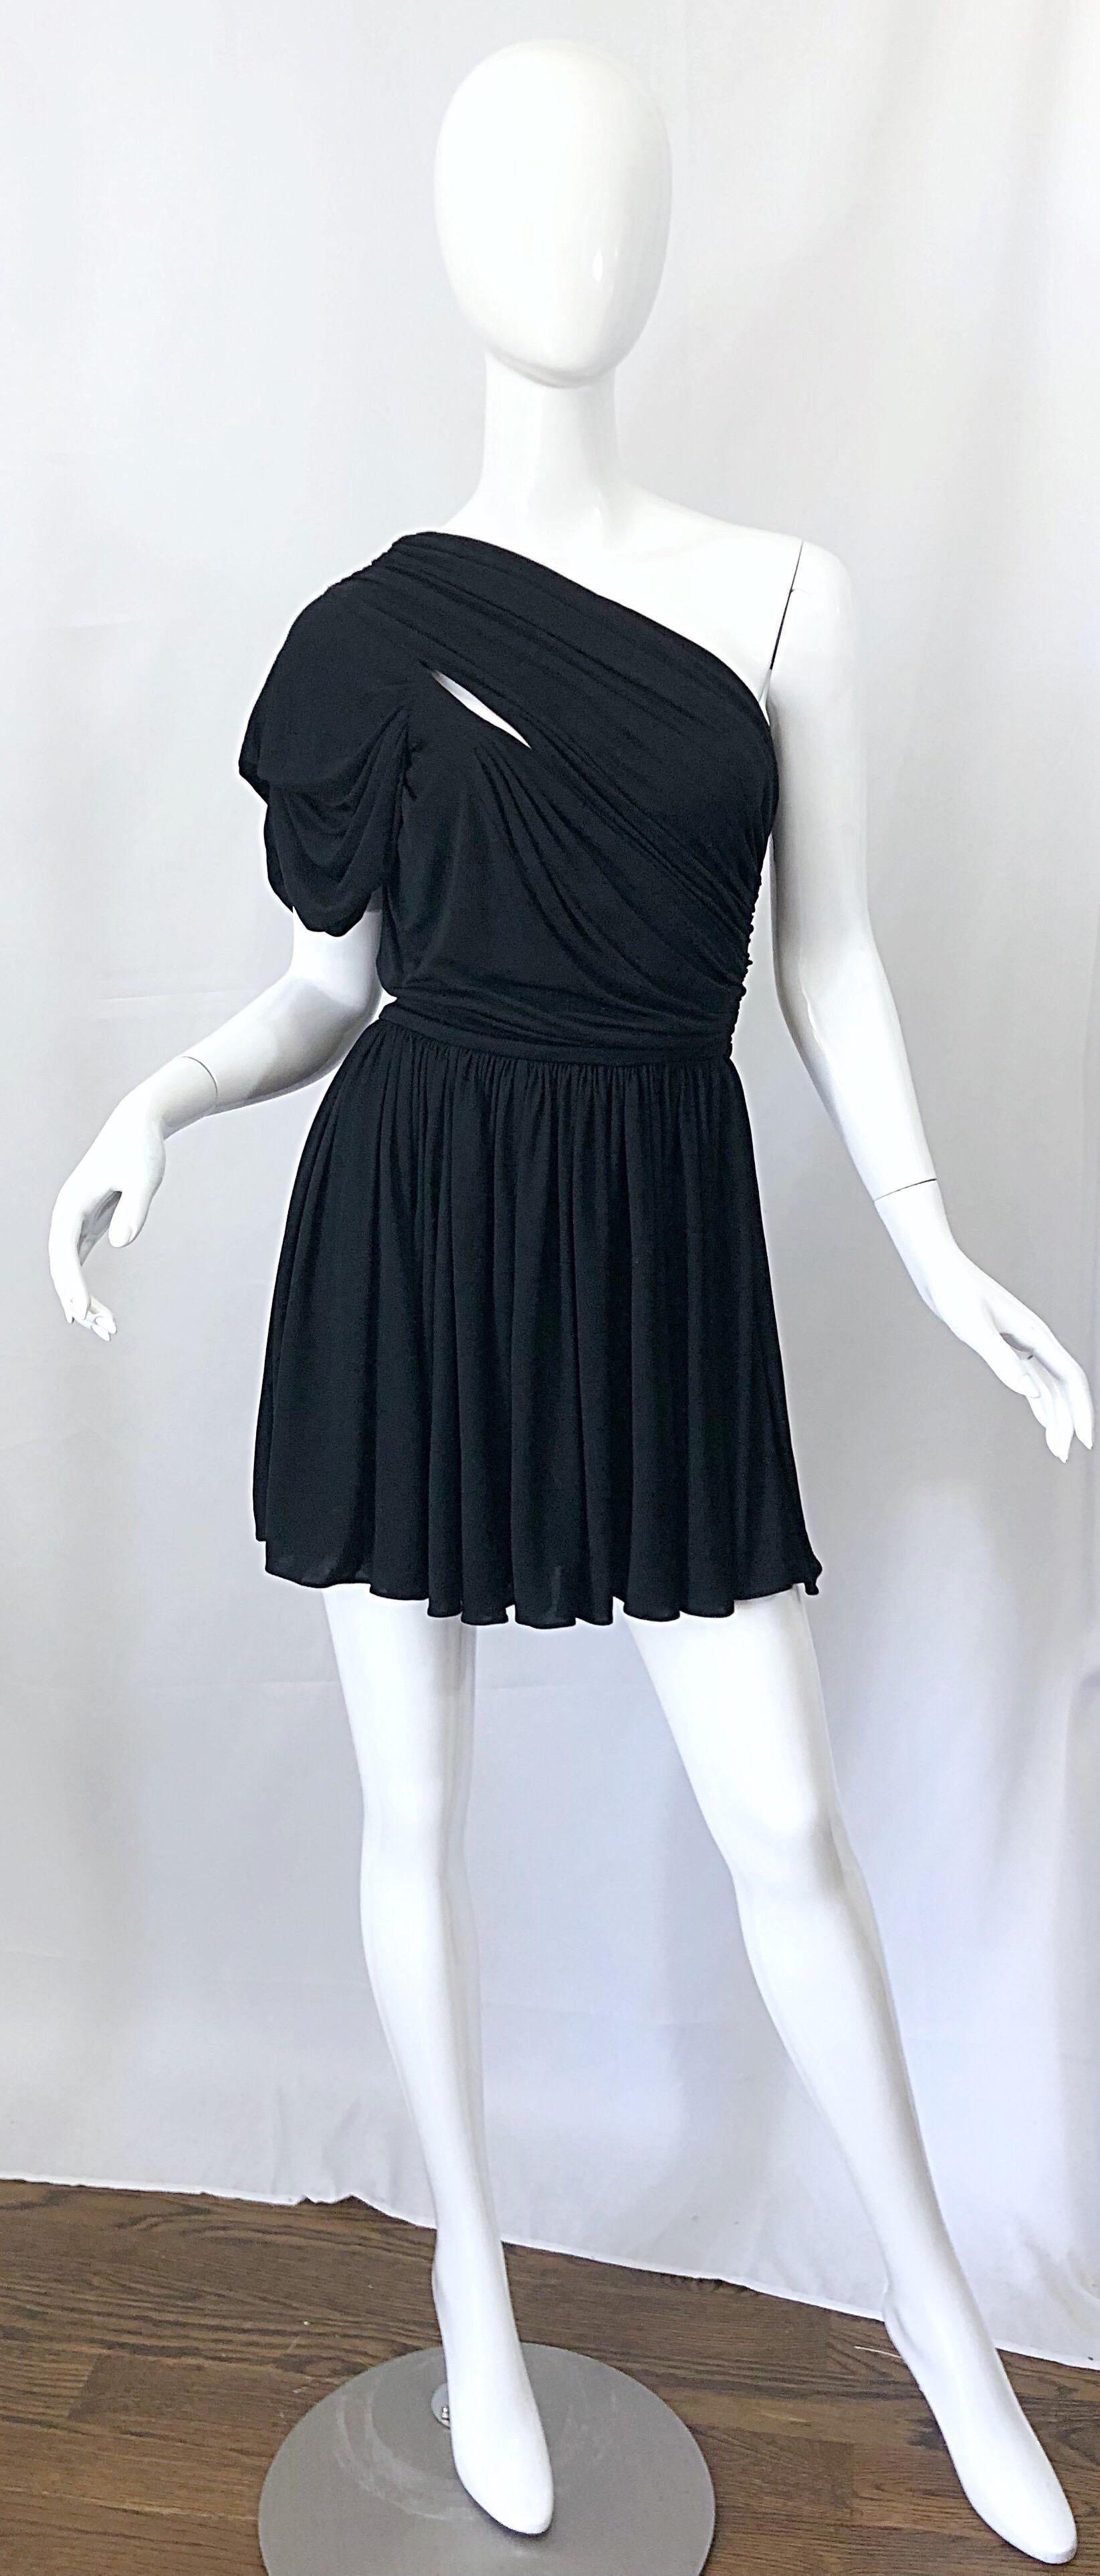 Sexy, yet classic early 2000s JOHN GALLIANO black one shoulder rayon jersey dress! Brand new with tags. Features cut-outs above the right bust in the front, and matching in the back. Drapes wonderfully, and really flatters the body. Hidden zipper up